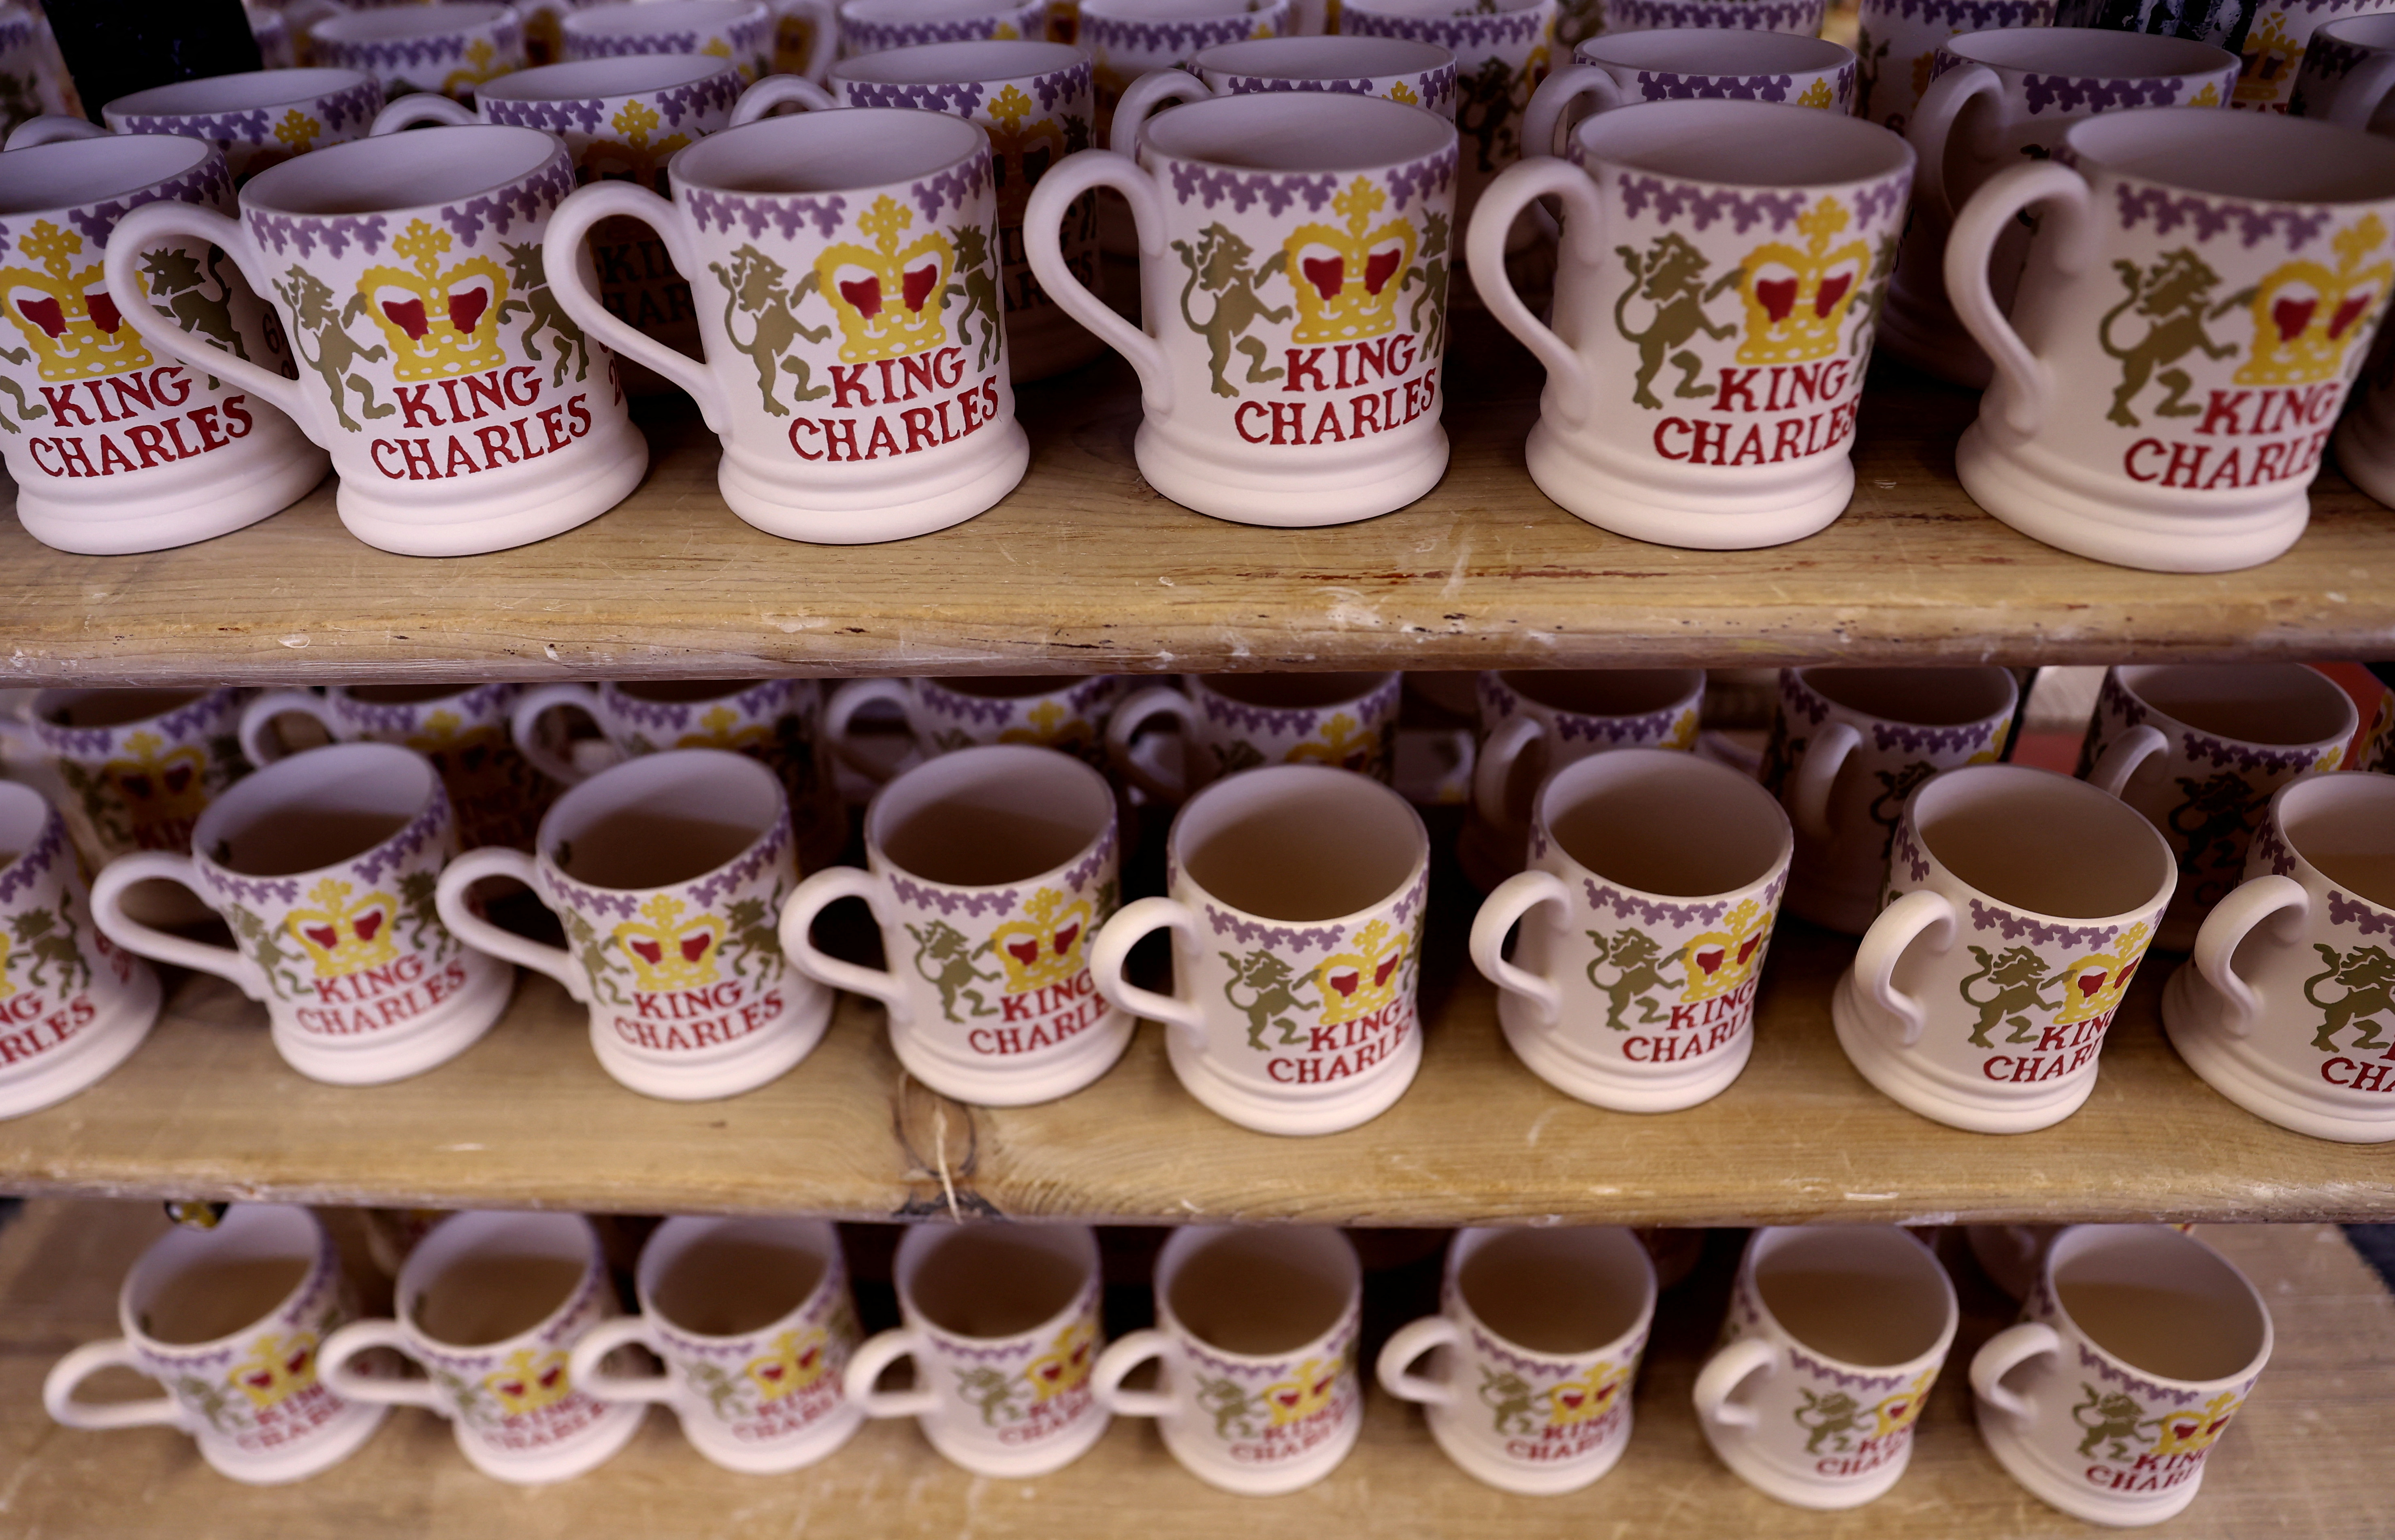 Decorated mugs commemorating the coronation of Britain's King Charles are seen at the Emma Bridgewater Factory, in Hanley, Stoke-on-Trent